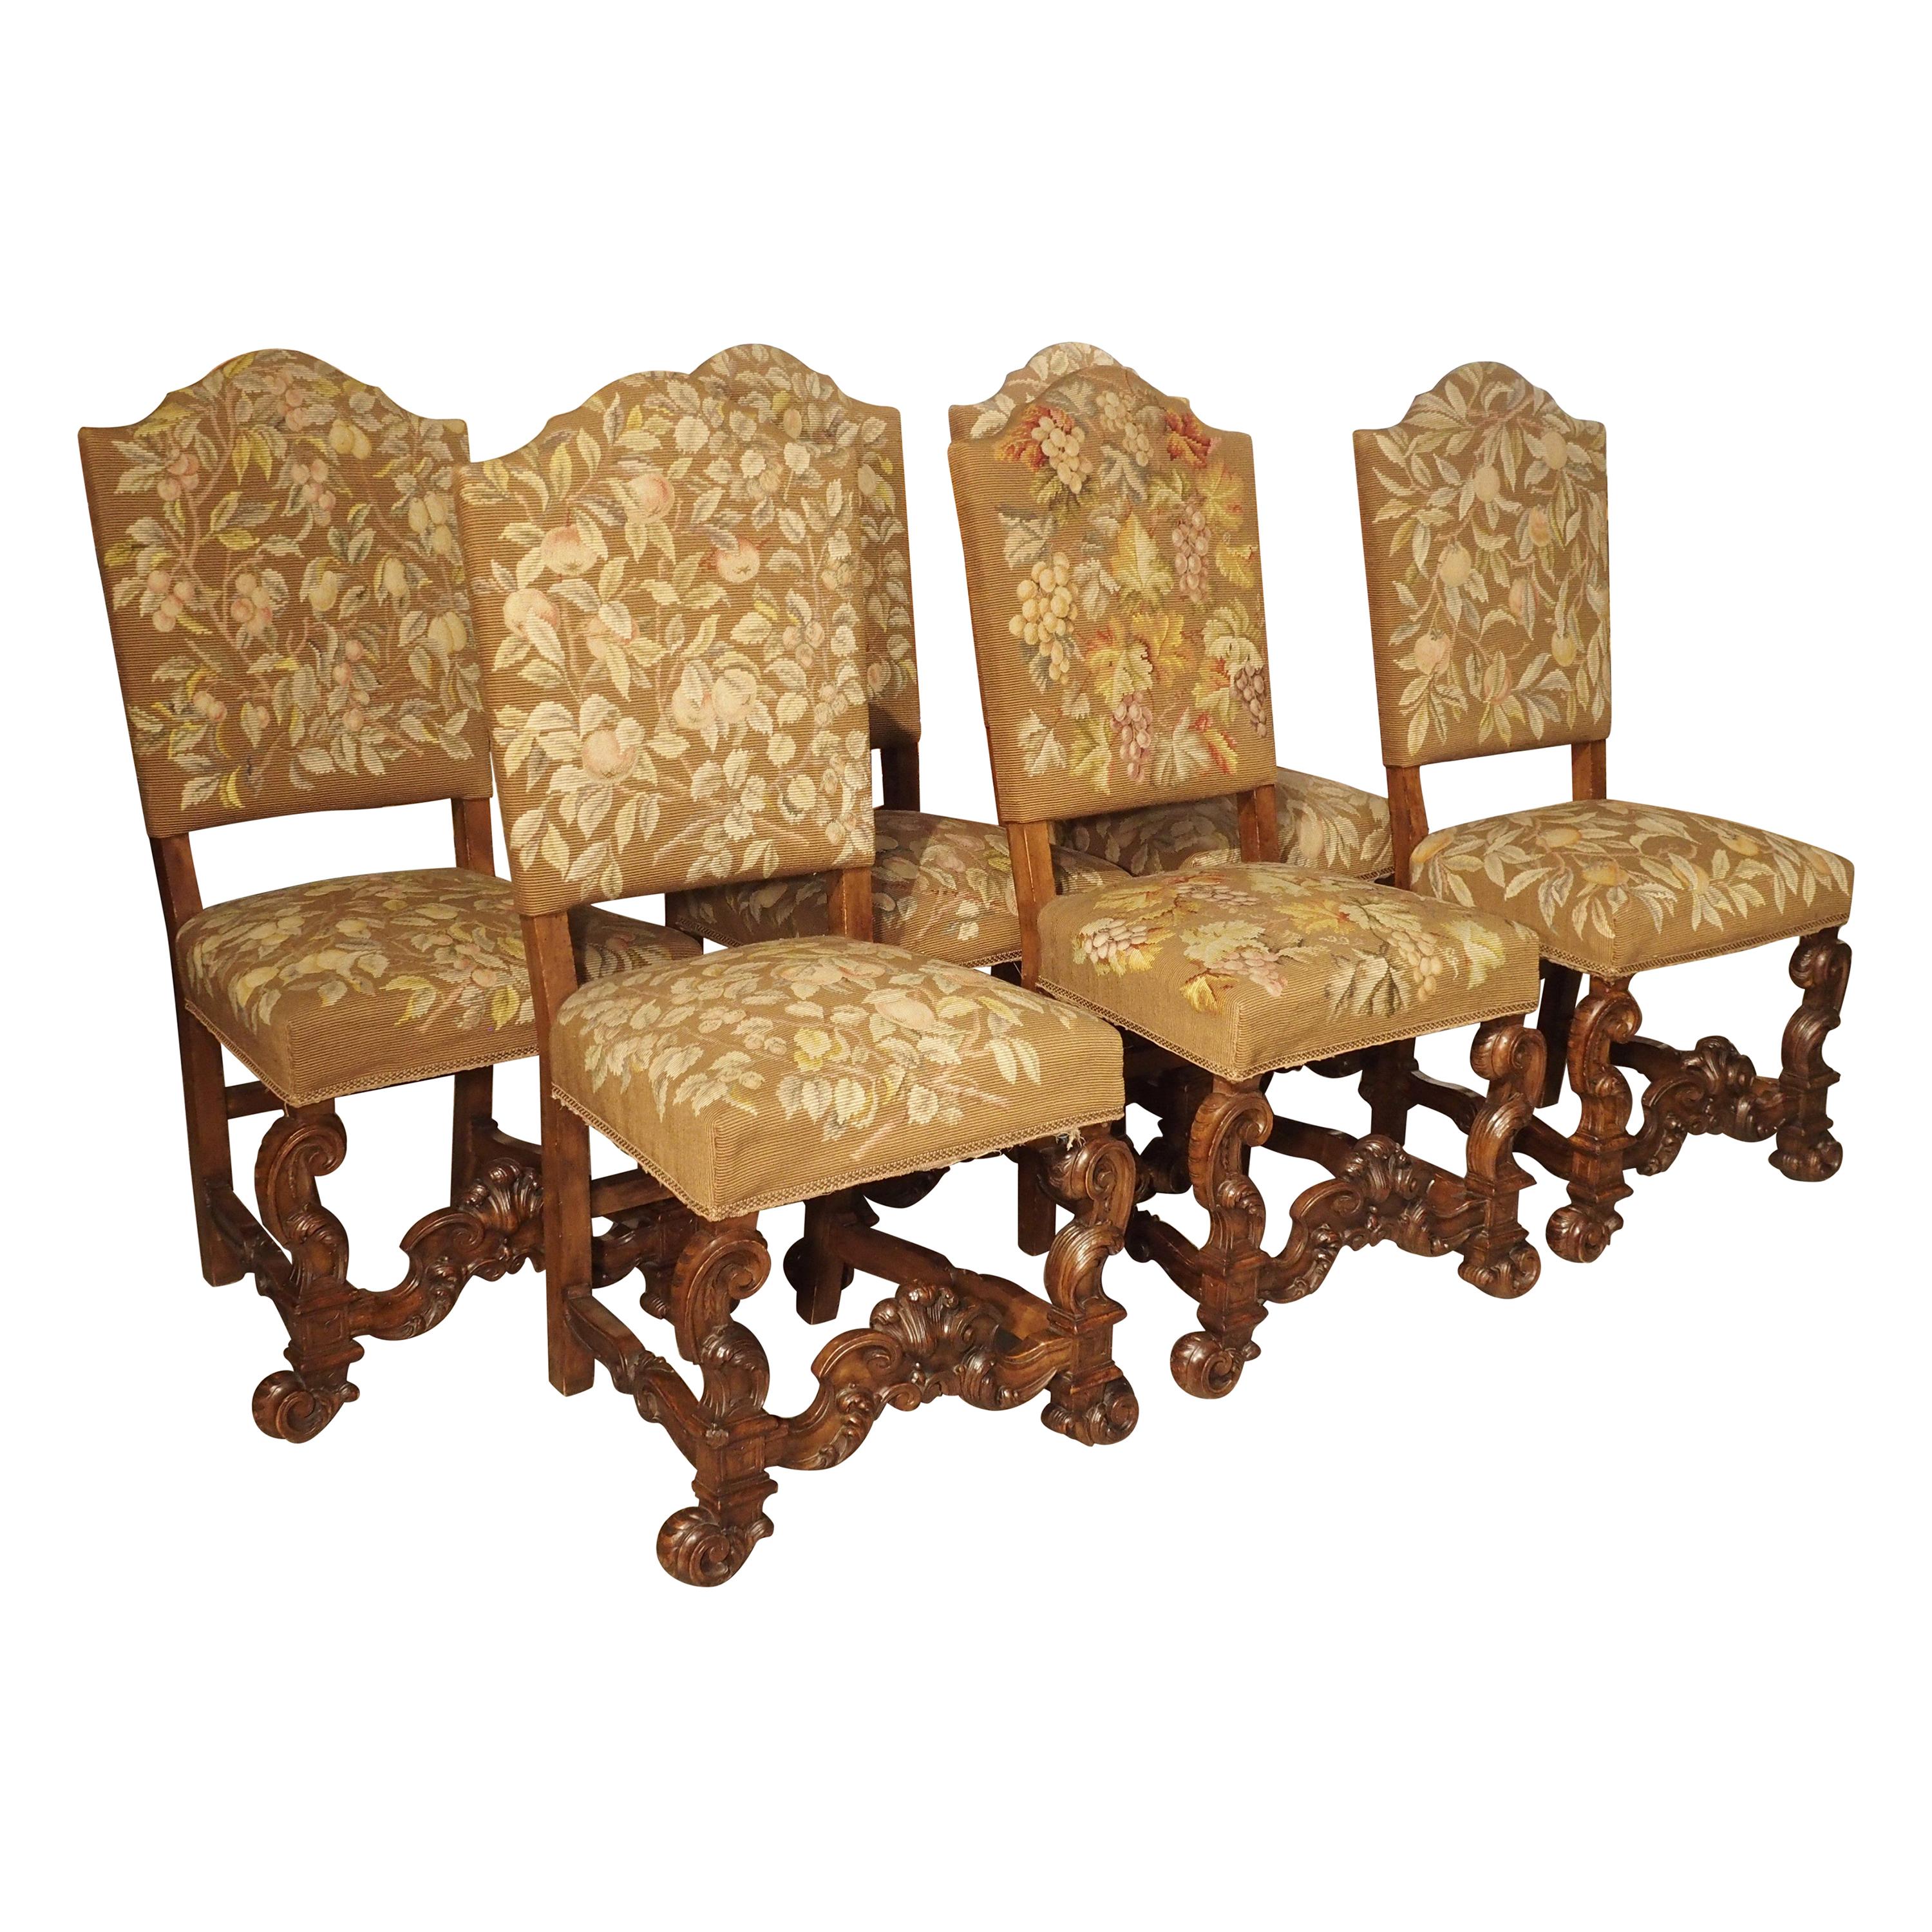 Set of 6 Carved Walnut Wood Dining Chairs from Lombardy, Late 19th Century